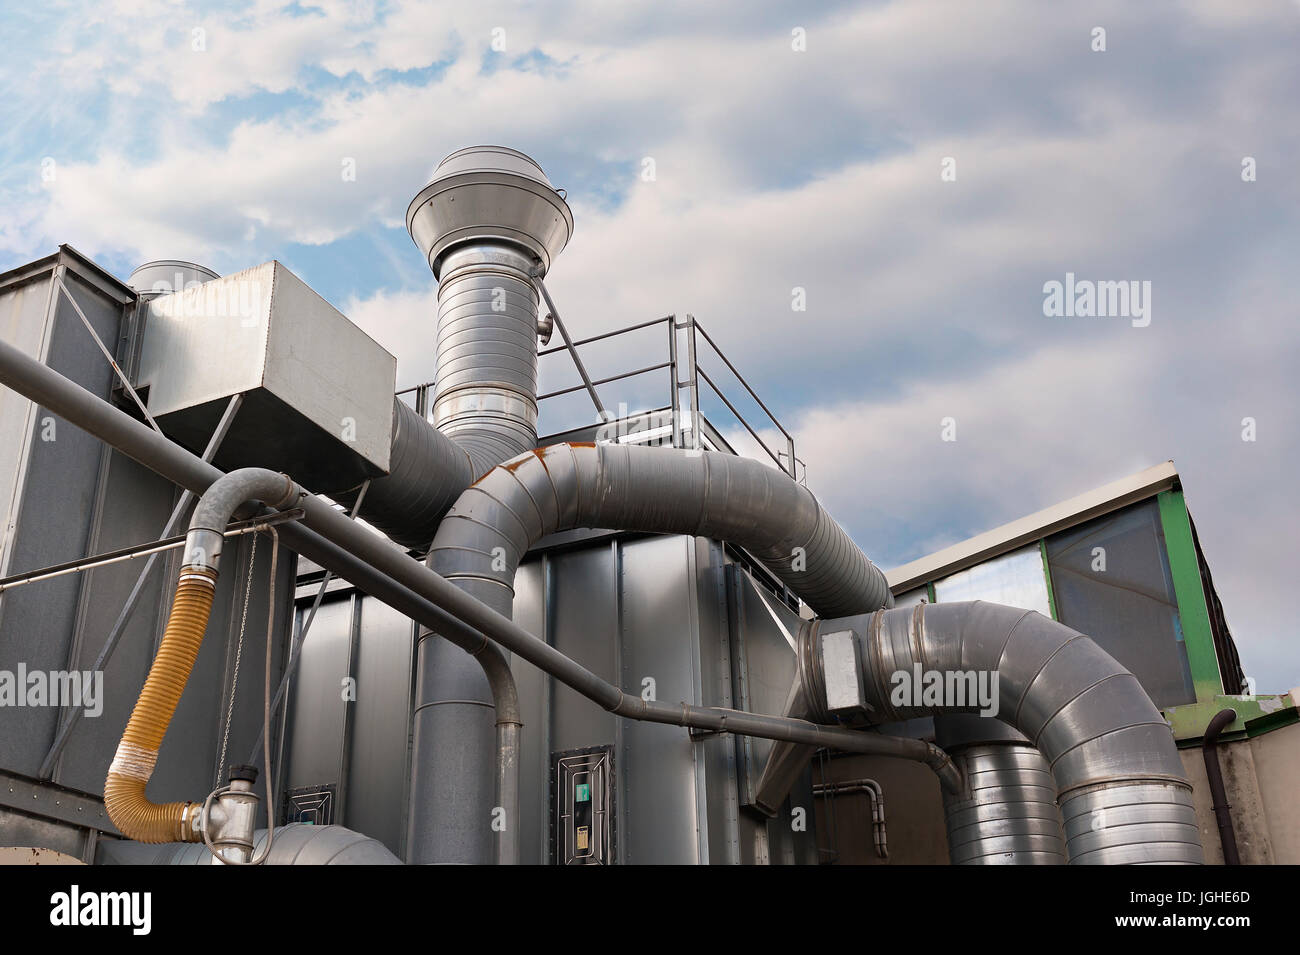 Industrial factory air filtration system. Tubes, tank and chimney. Stock Photo